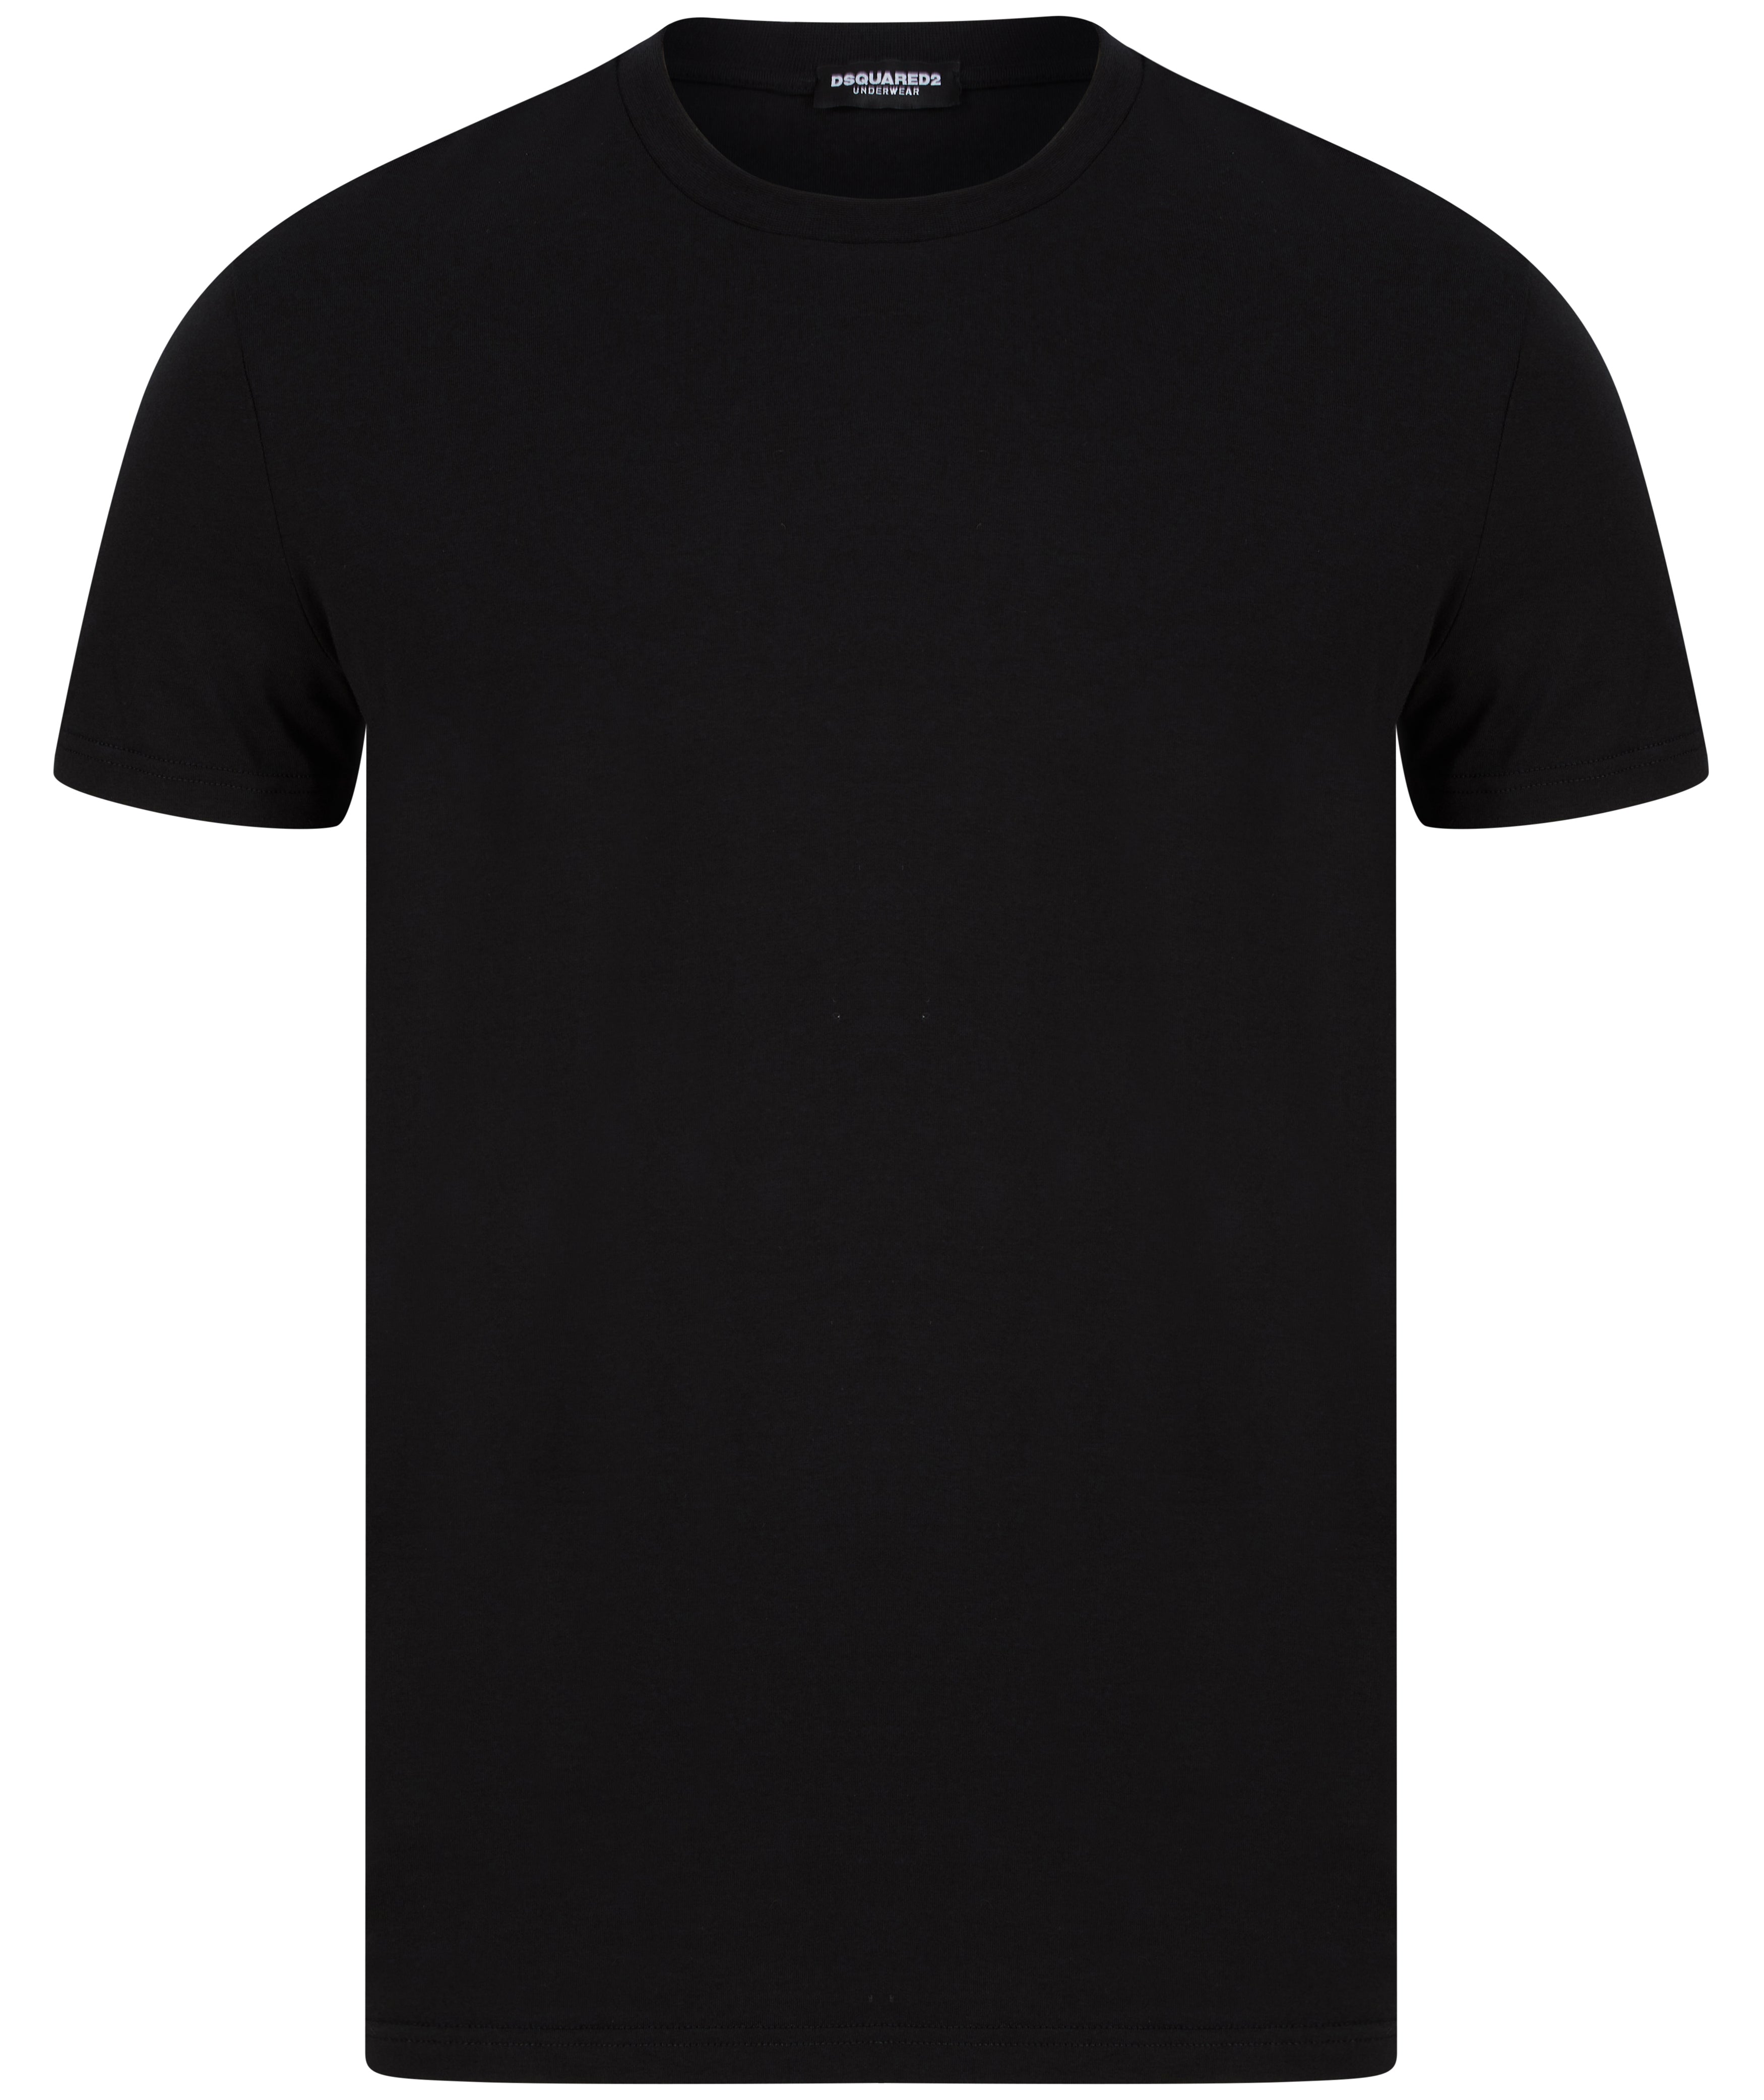 Load image into Gallery viewer, DSquared2 DSQ2 Small Logo Tee Black
